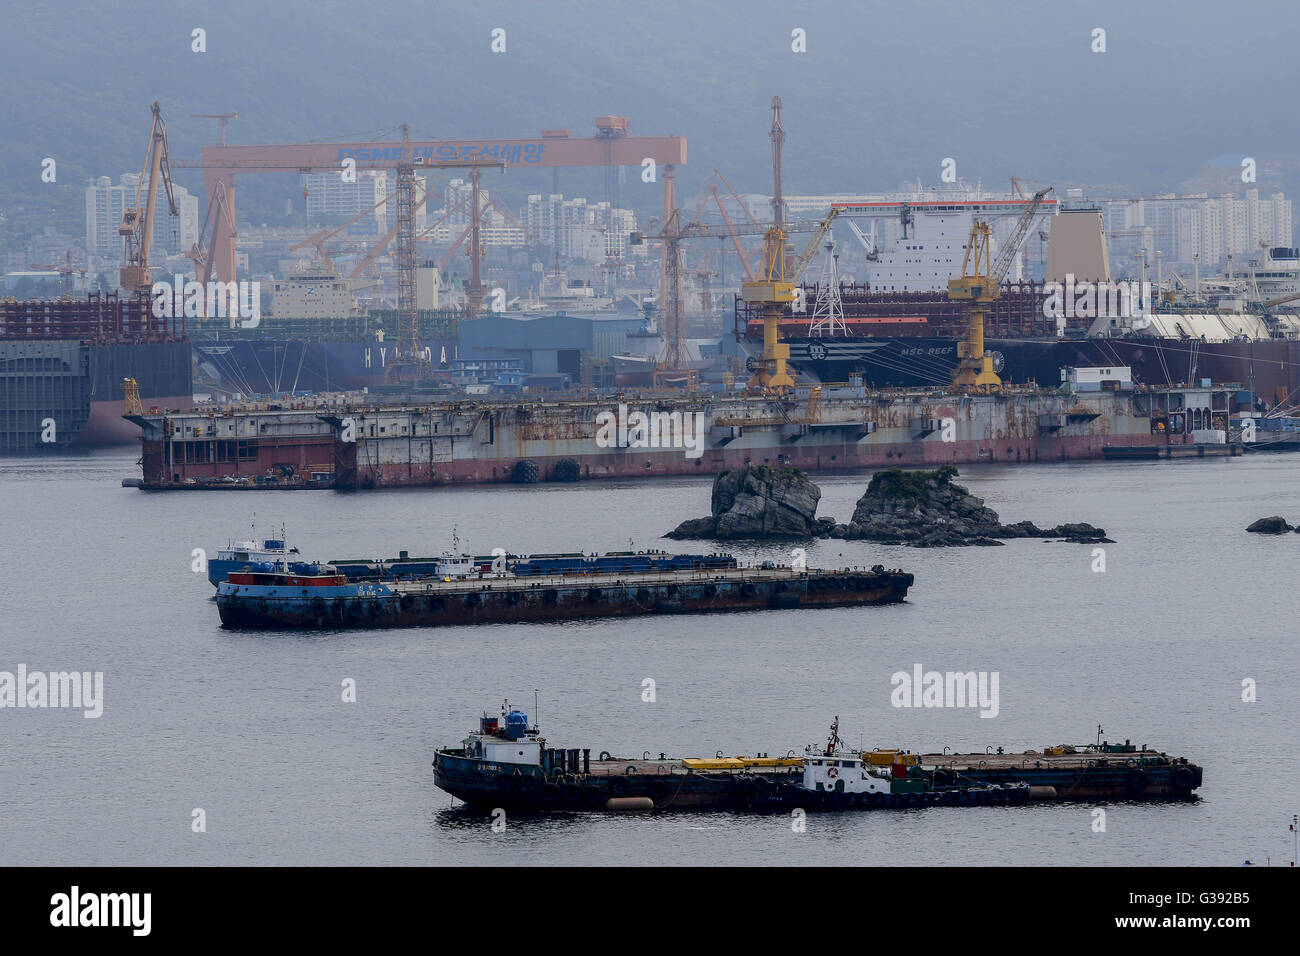 June 7, 2016 - Geoje, Gyeongnam, South Korea - Ships under construction sit moored at the DSME shipyard in Geoje, South Korea. Shipbuilding has been central to South Korea's economy since the 1970s. Ships accounted for 8.5 percent of the country's total exports through June 20 of October 2015, according to the trade ministry. After more than a decade of global dominance, South Korea's shipbuilders face an unprecedented crisis that threatens the very survival of one of the flagship industries of Asia's fourth largest economy. Major South Korean shipbuilders plan to restructure their operations  Stock Photo